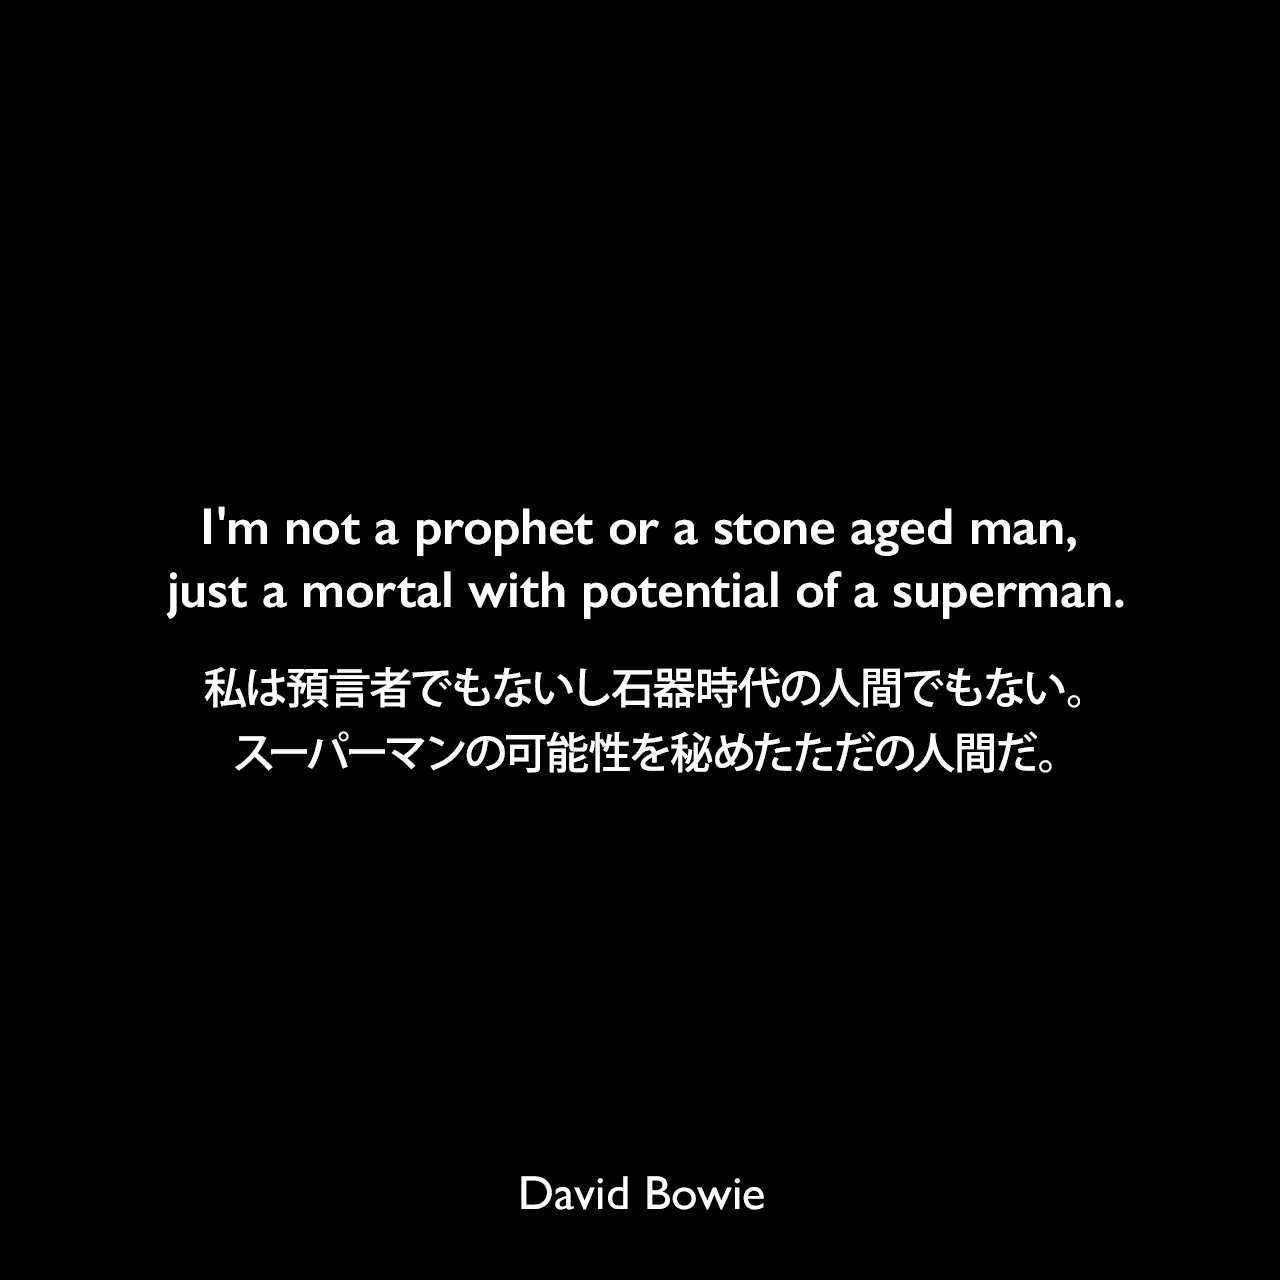 I'm not a prophet or a stone aged man, just a mortal with potential of a superman.私は預言者でもないし石器時代の人間でもない。スーパーマンの可能性を秘めたただの人間だ。- デヴィッド・ボーイの曲 流砂 / QuicksandよりDavid Bowie